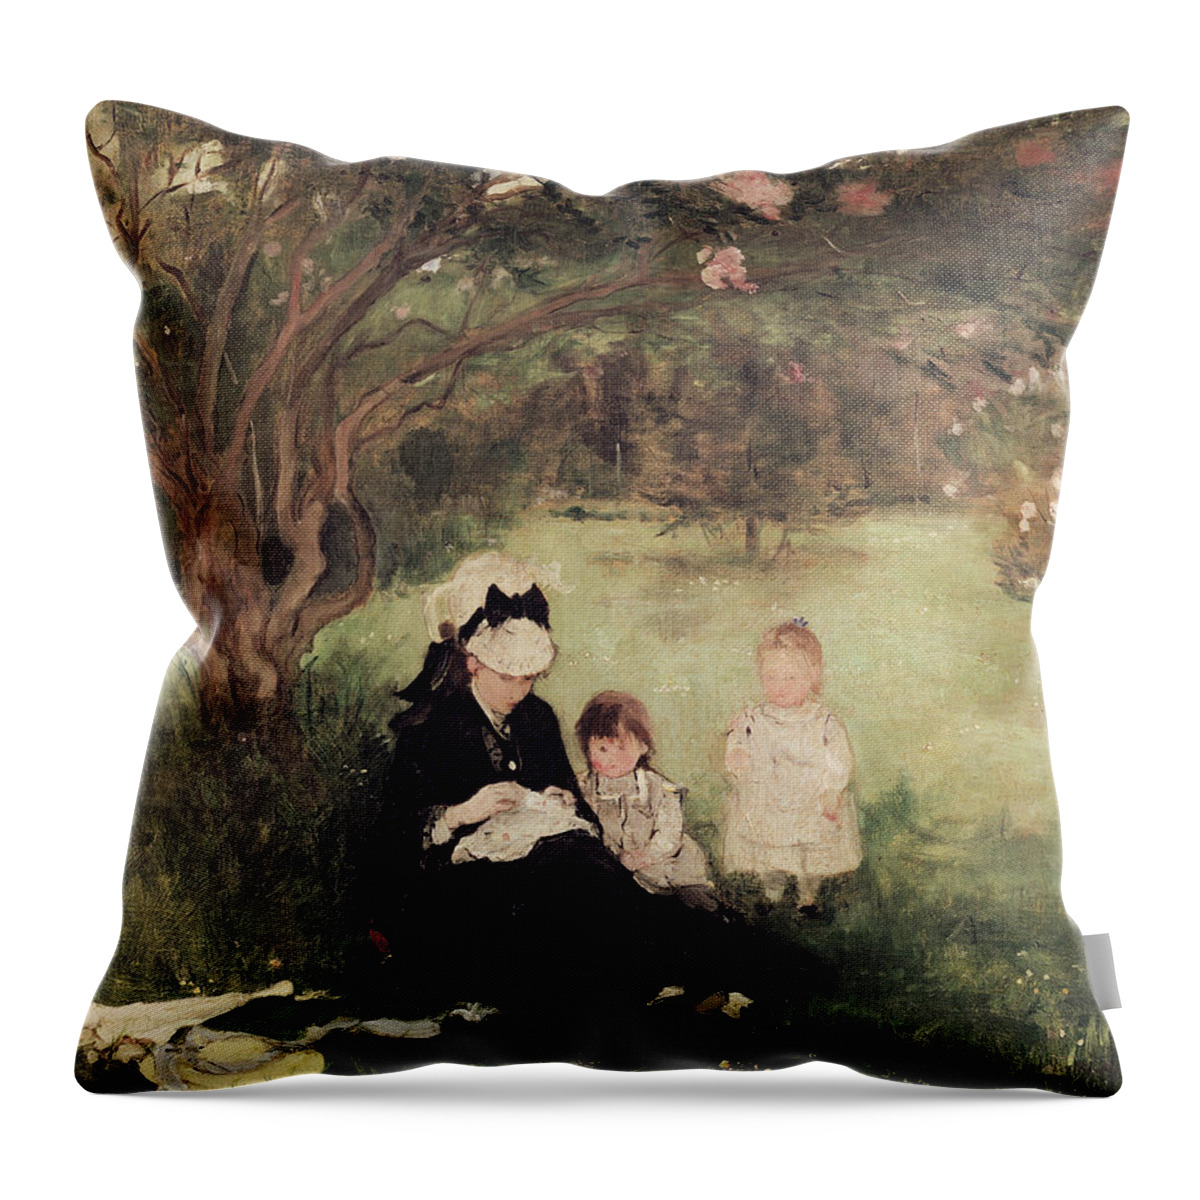 Beneath Throw Pillow featuring the painting Beneath the Lilac at Maurecourt by Berthe Morisot